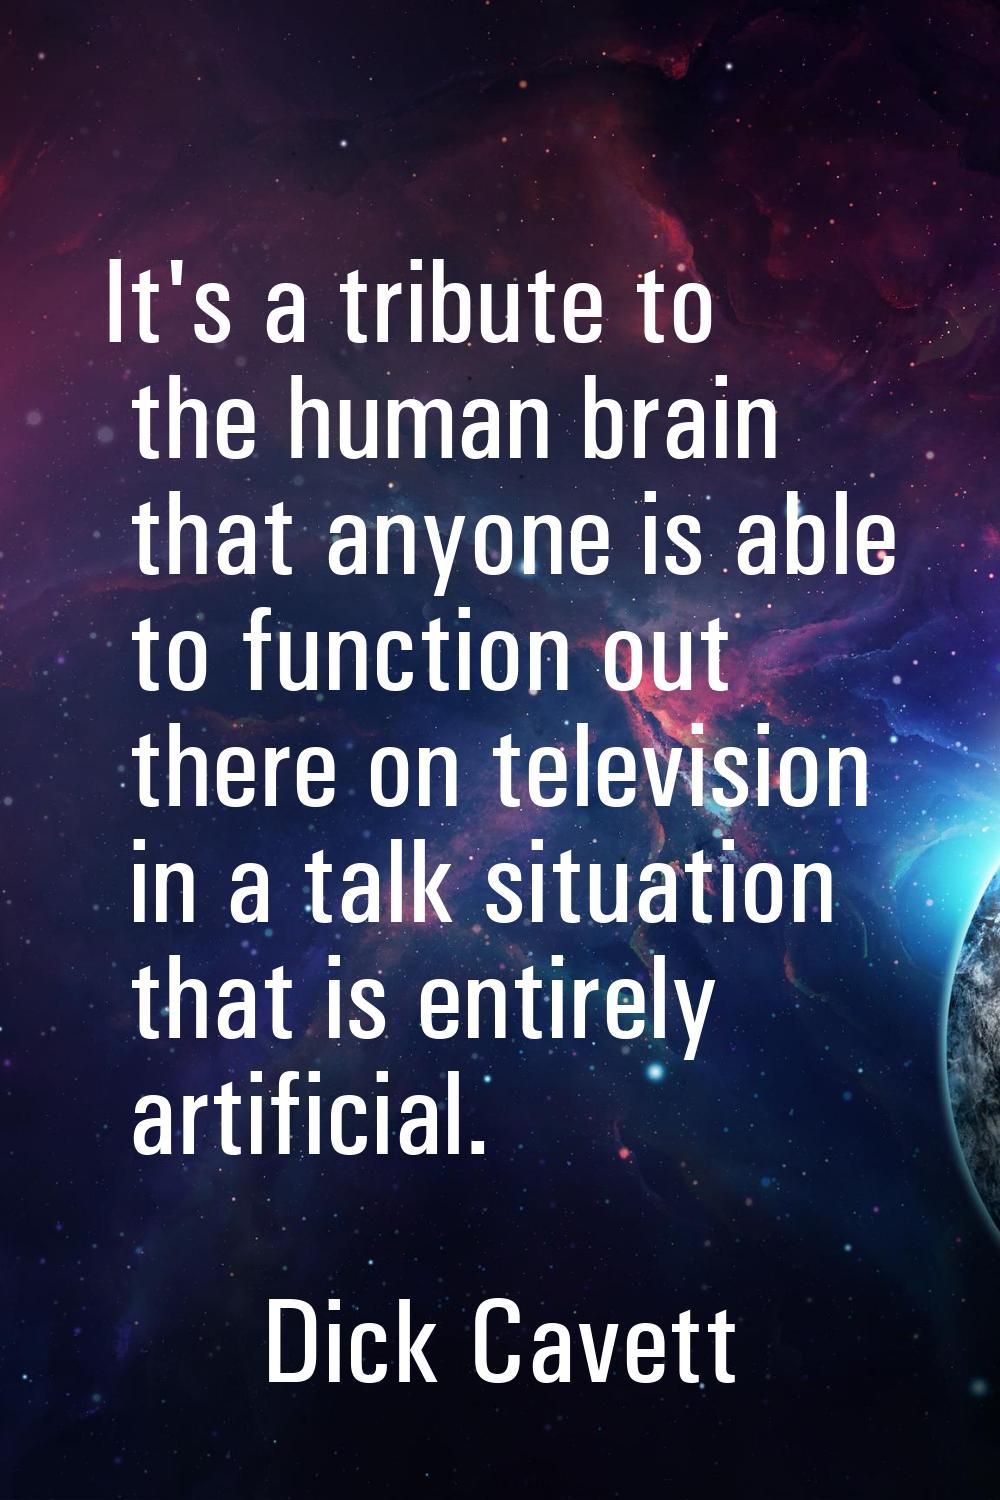 It's a tribute to the human brain that anyone is able to function out there on television in a talk